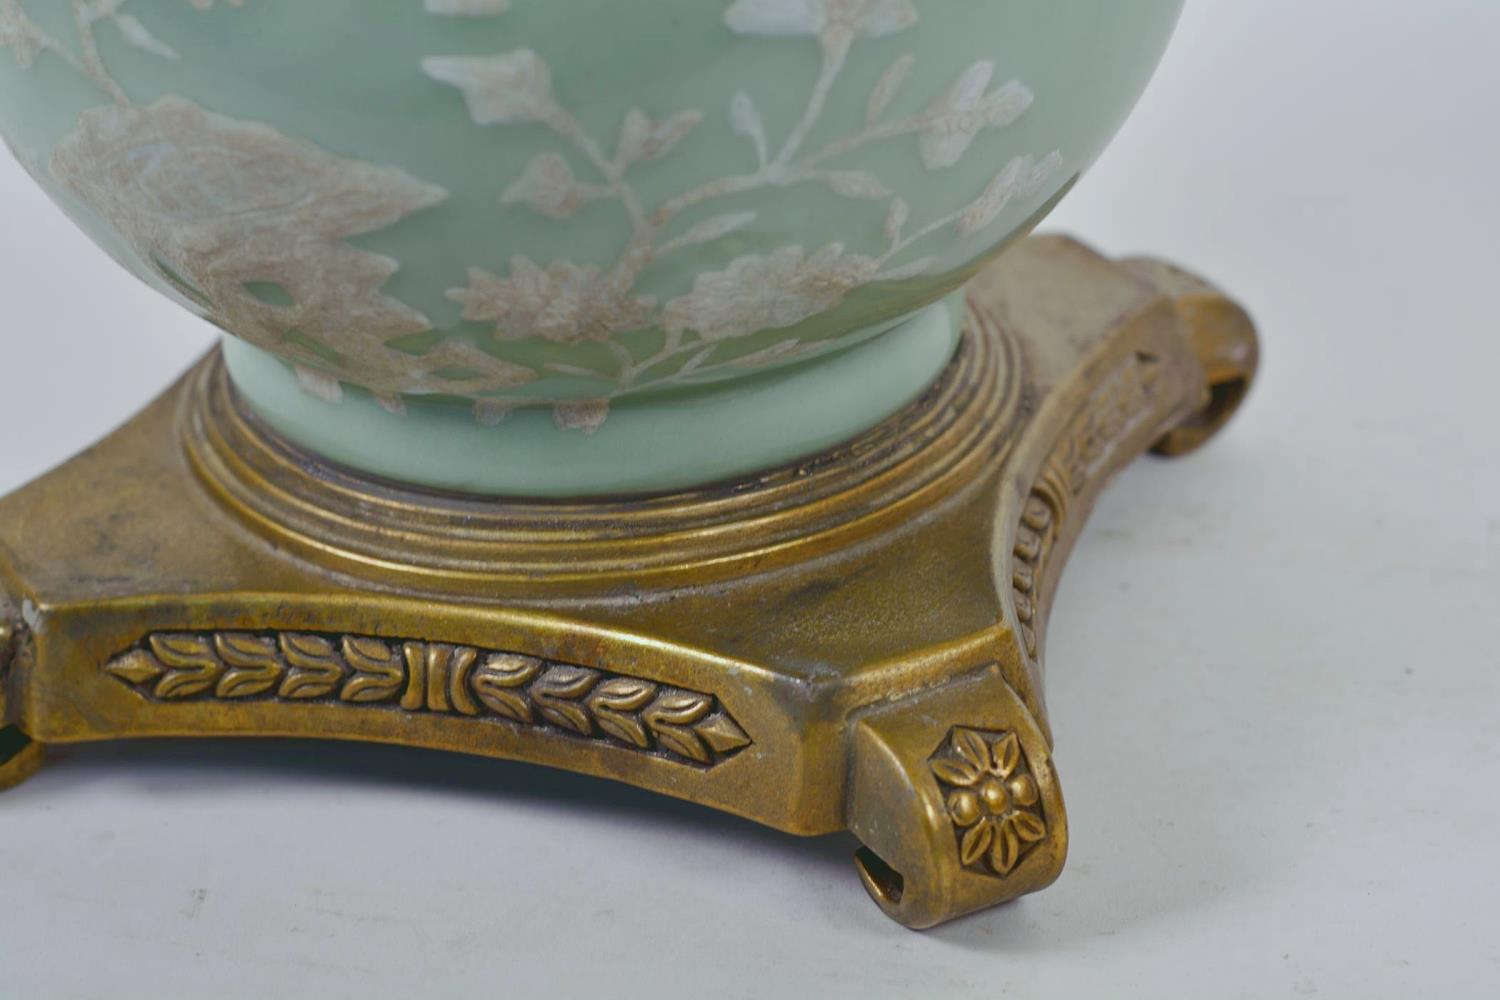 A Chinese celadon glazed porcelain vase with ormolu style mount and raised floral decoration, seal - Image 10 of 13